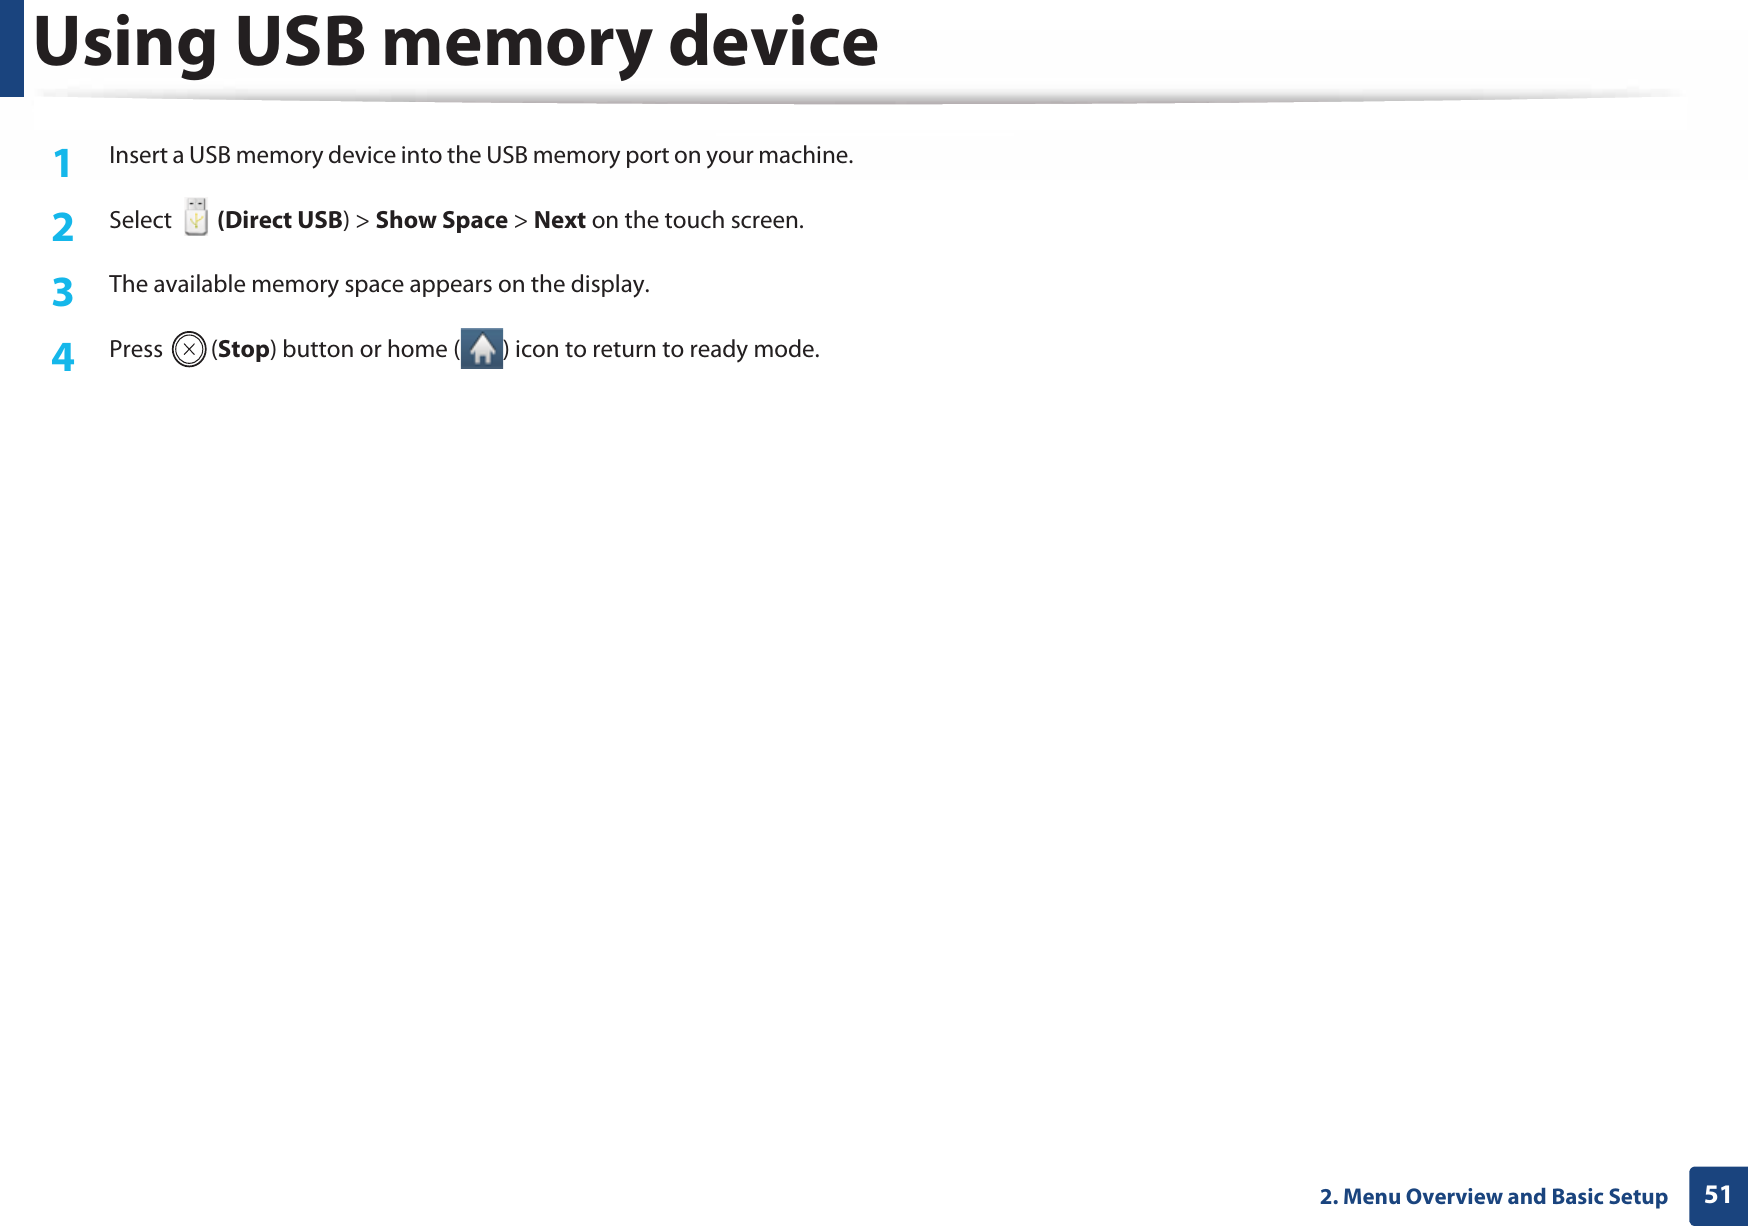 Using USB memory device512. Menu Overview and Basic Setup1Insert a USB memory device into the USB memory port on your machine.2  Select   (Direct USB) &gt; Show Space &gt; Next on the touch screen.3  The available memory space appears on the display.4  Press (Stop) button or home ( ) icon to return to ready mode.